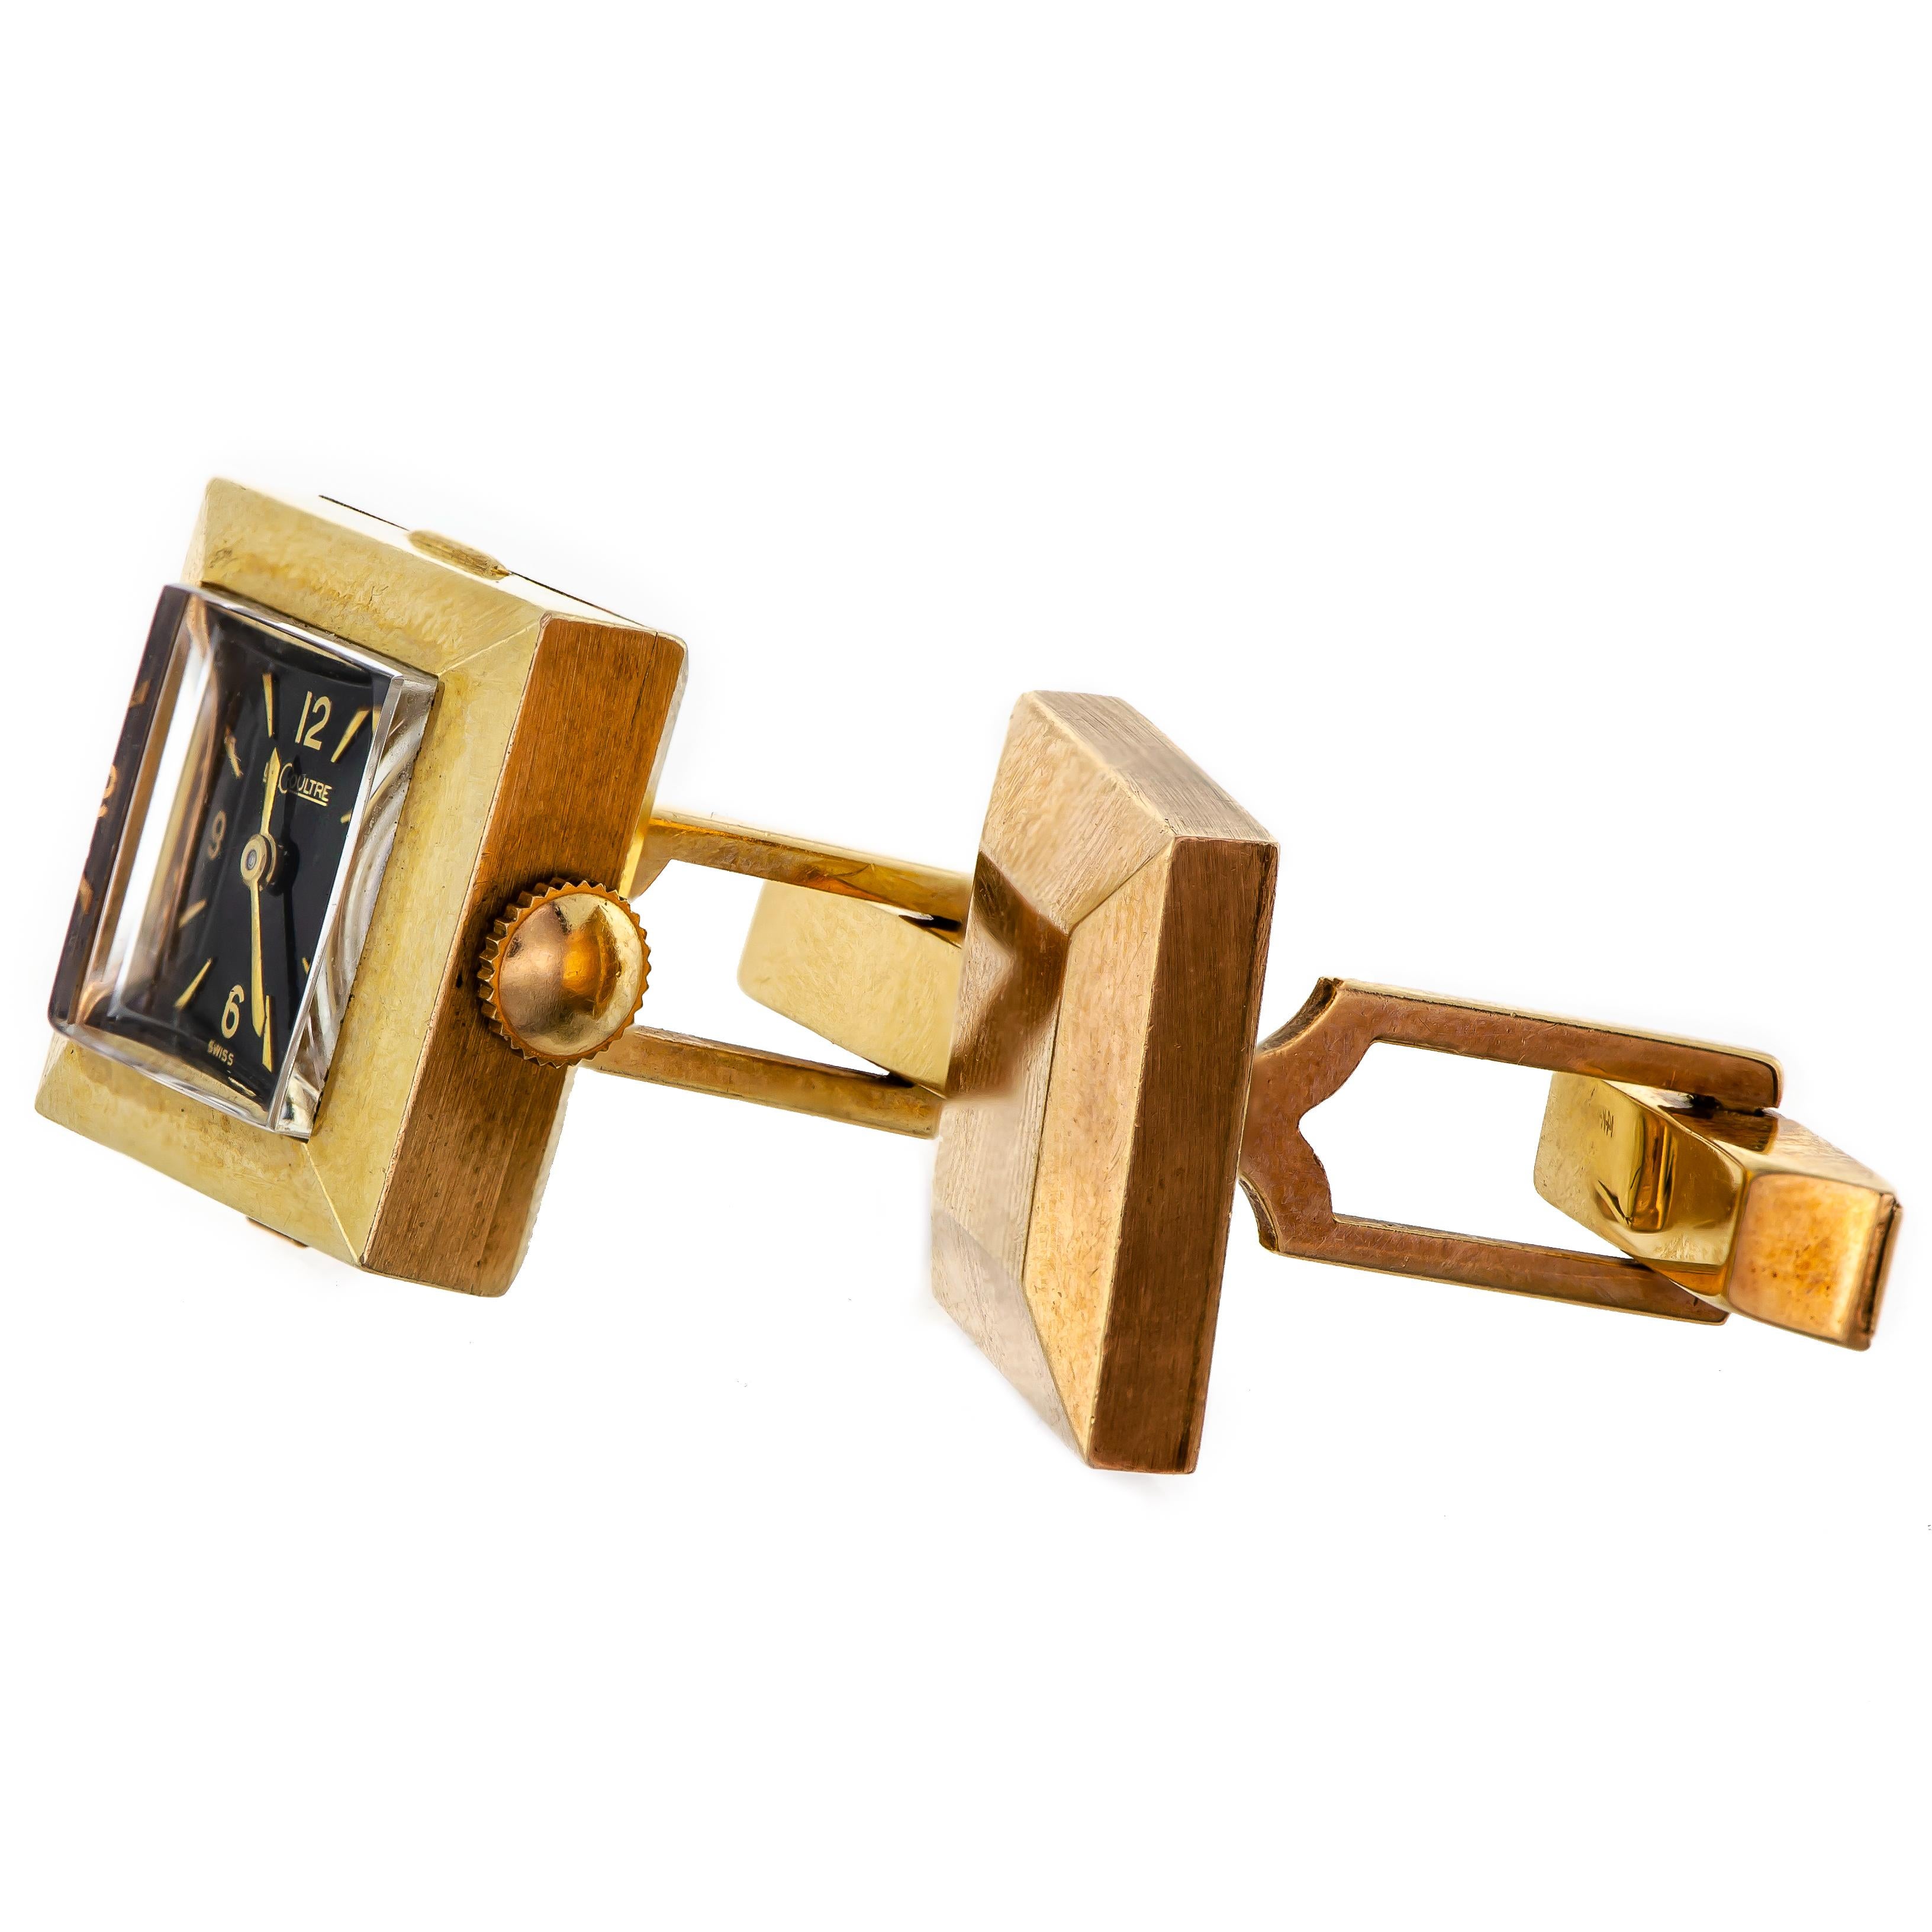 These are a pair of wonderful mid-century cufflinks made from 14K yellow gold, featuring a triple signed dial, case and movement LeCoultre watch. They were designed as a solid 14K yellow gold faceted square, with one cufflink set with a black dial